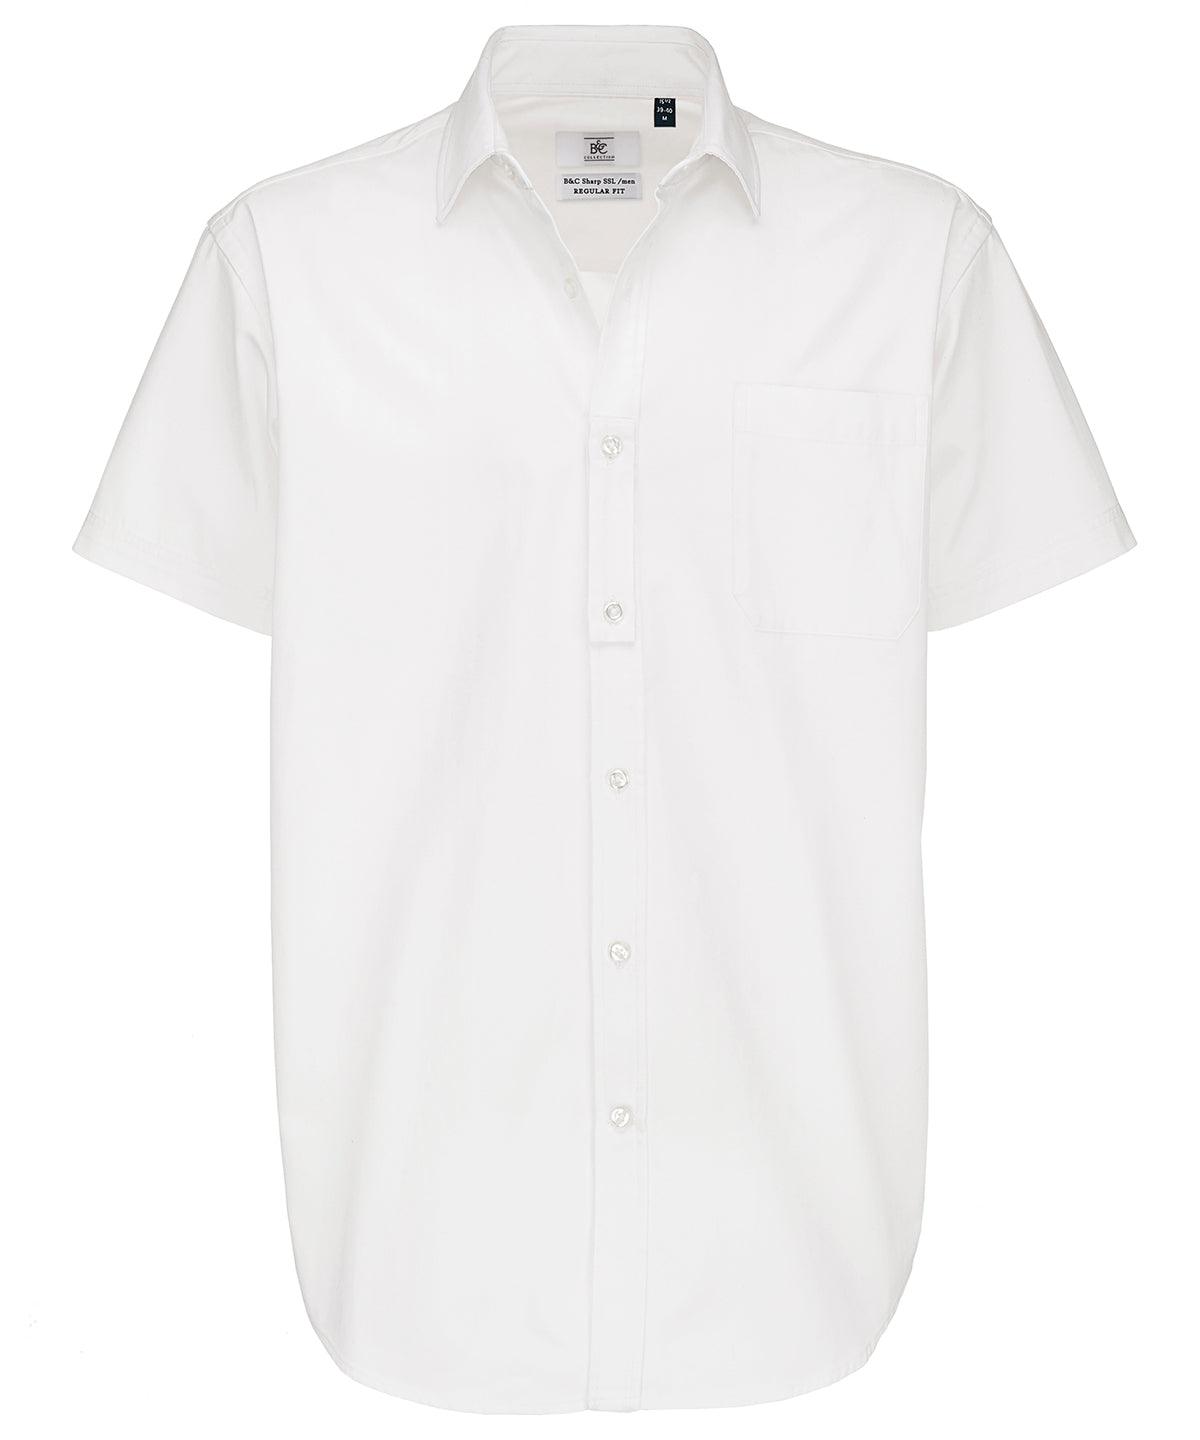 White - B&C Sharp short sleeve /men Shirts B&C Collection Plus Sizes, Raladeal - Recently Added, Shirts & Blouses Schoolwear Centres